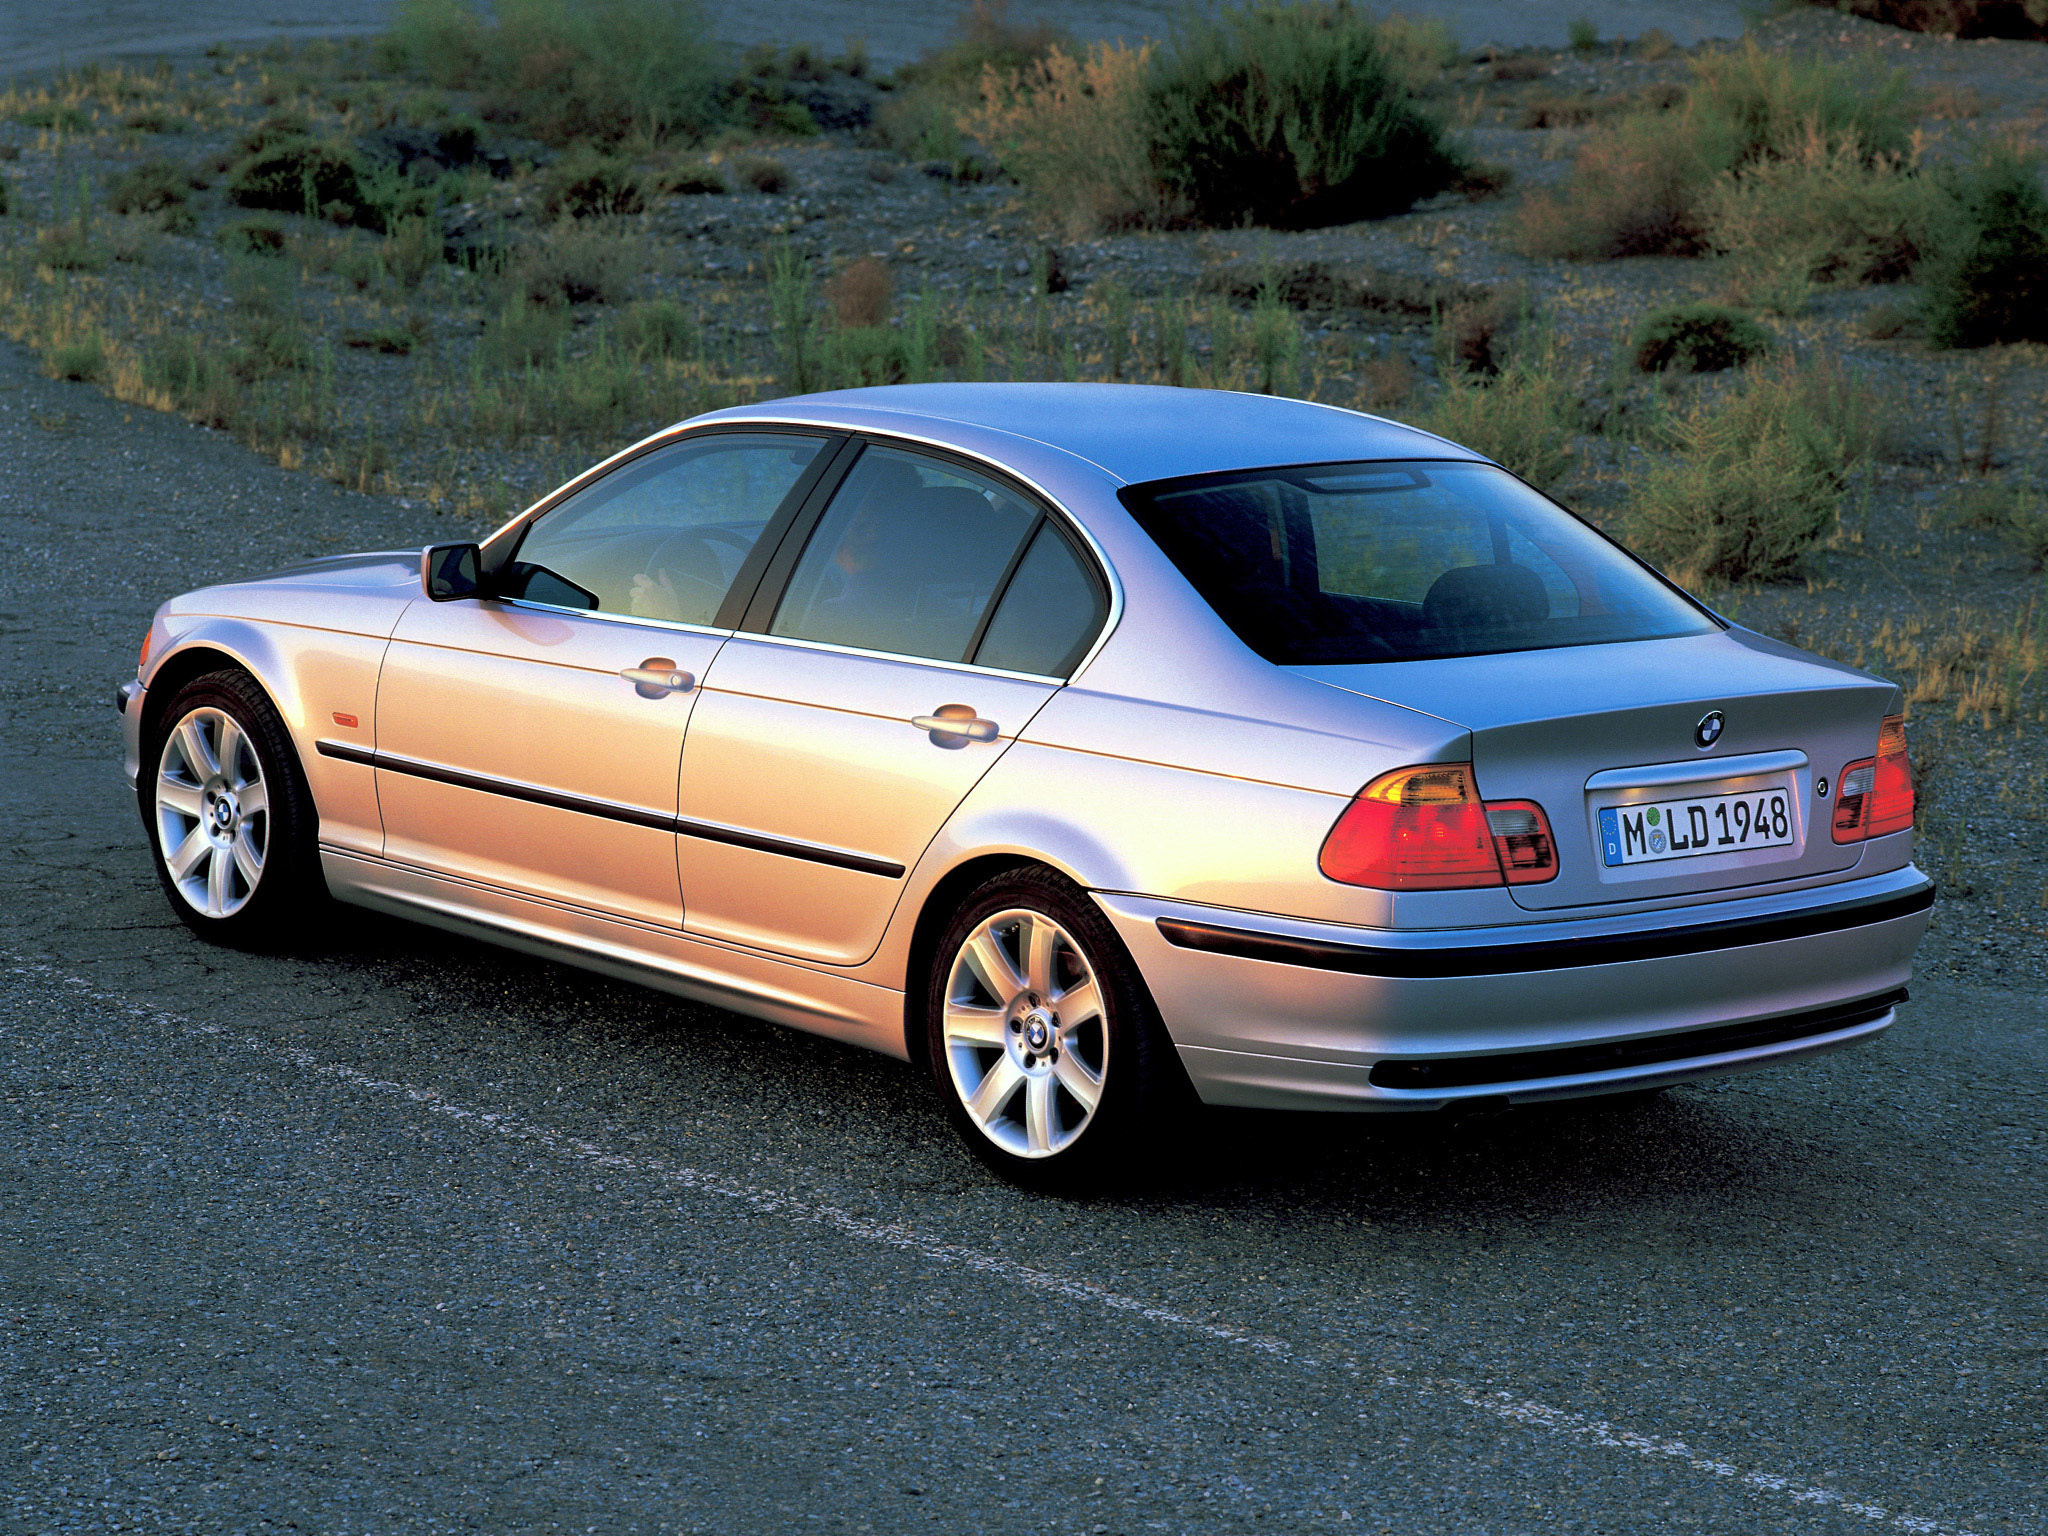 BMW 3series 1998 Review, Amazing Pictures and Images